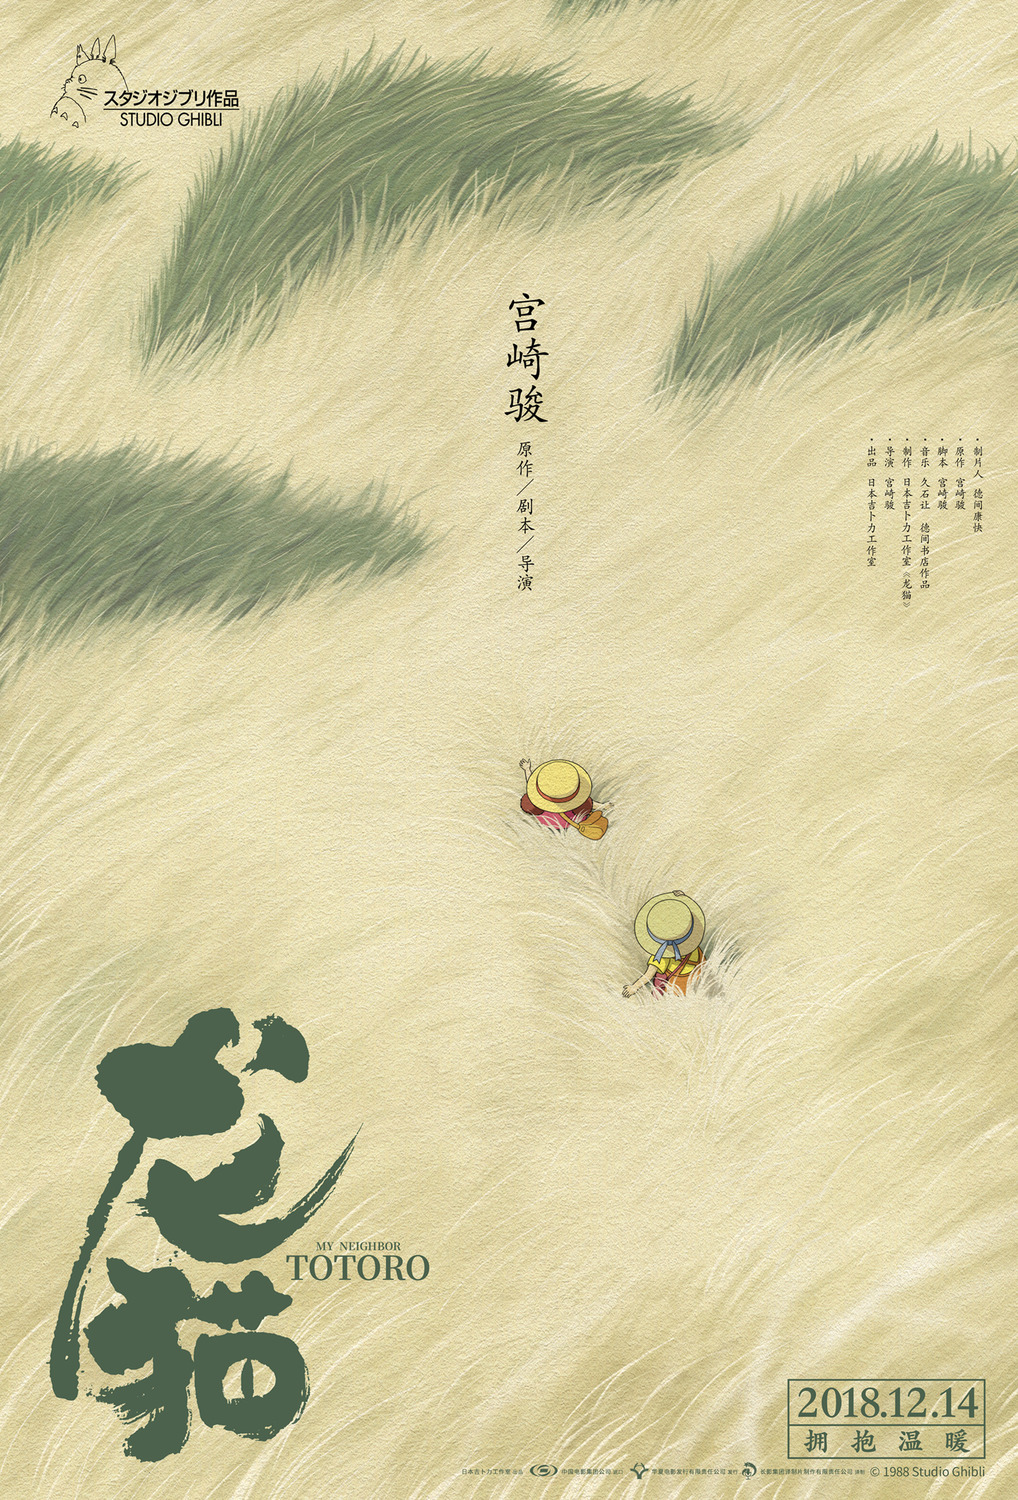 Extra Large Movie Poster Image for My Neighbor Totoro (#2 of 2)